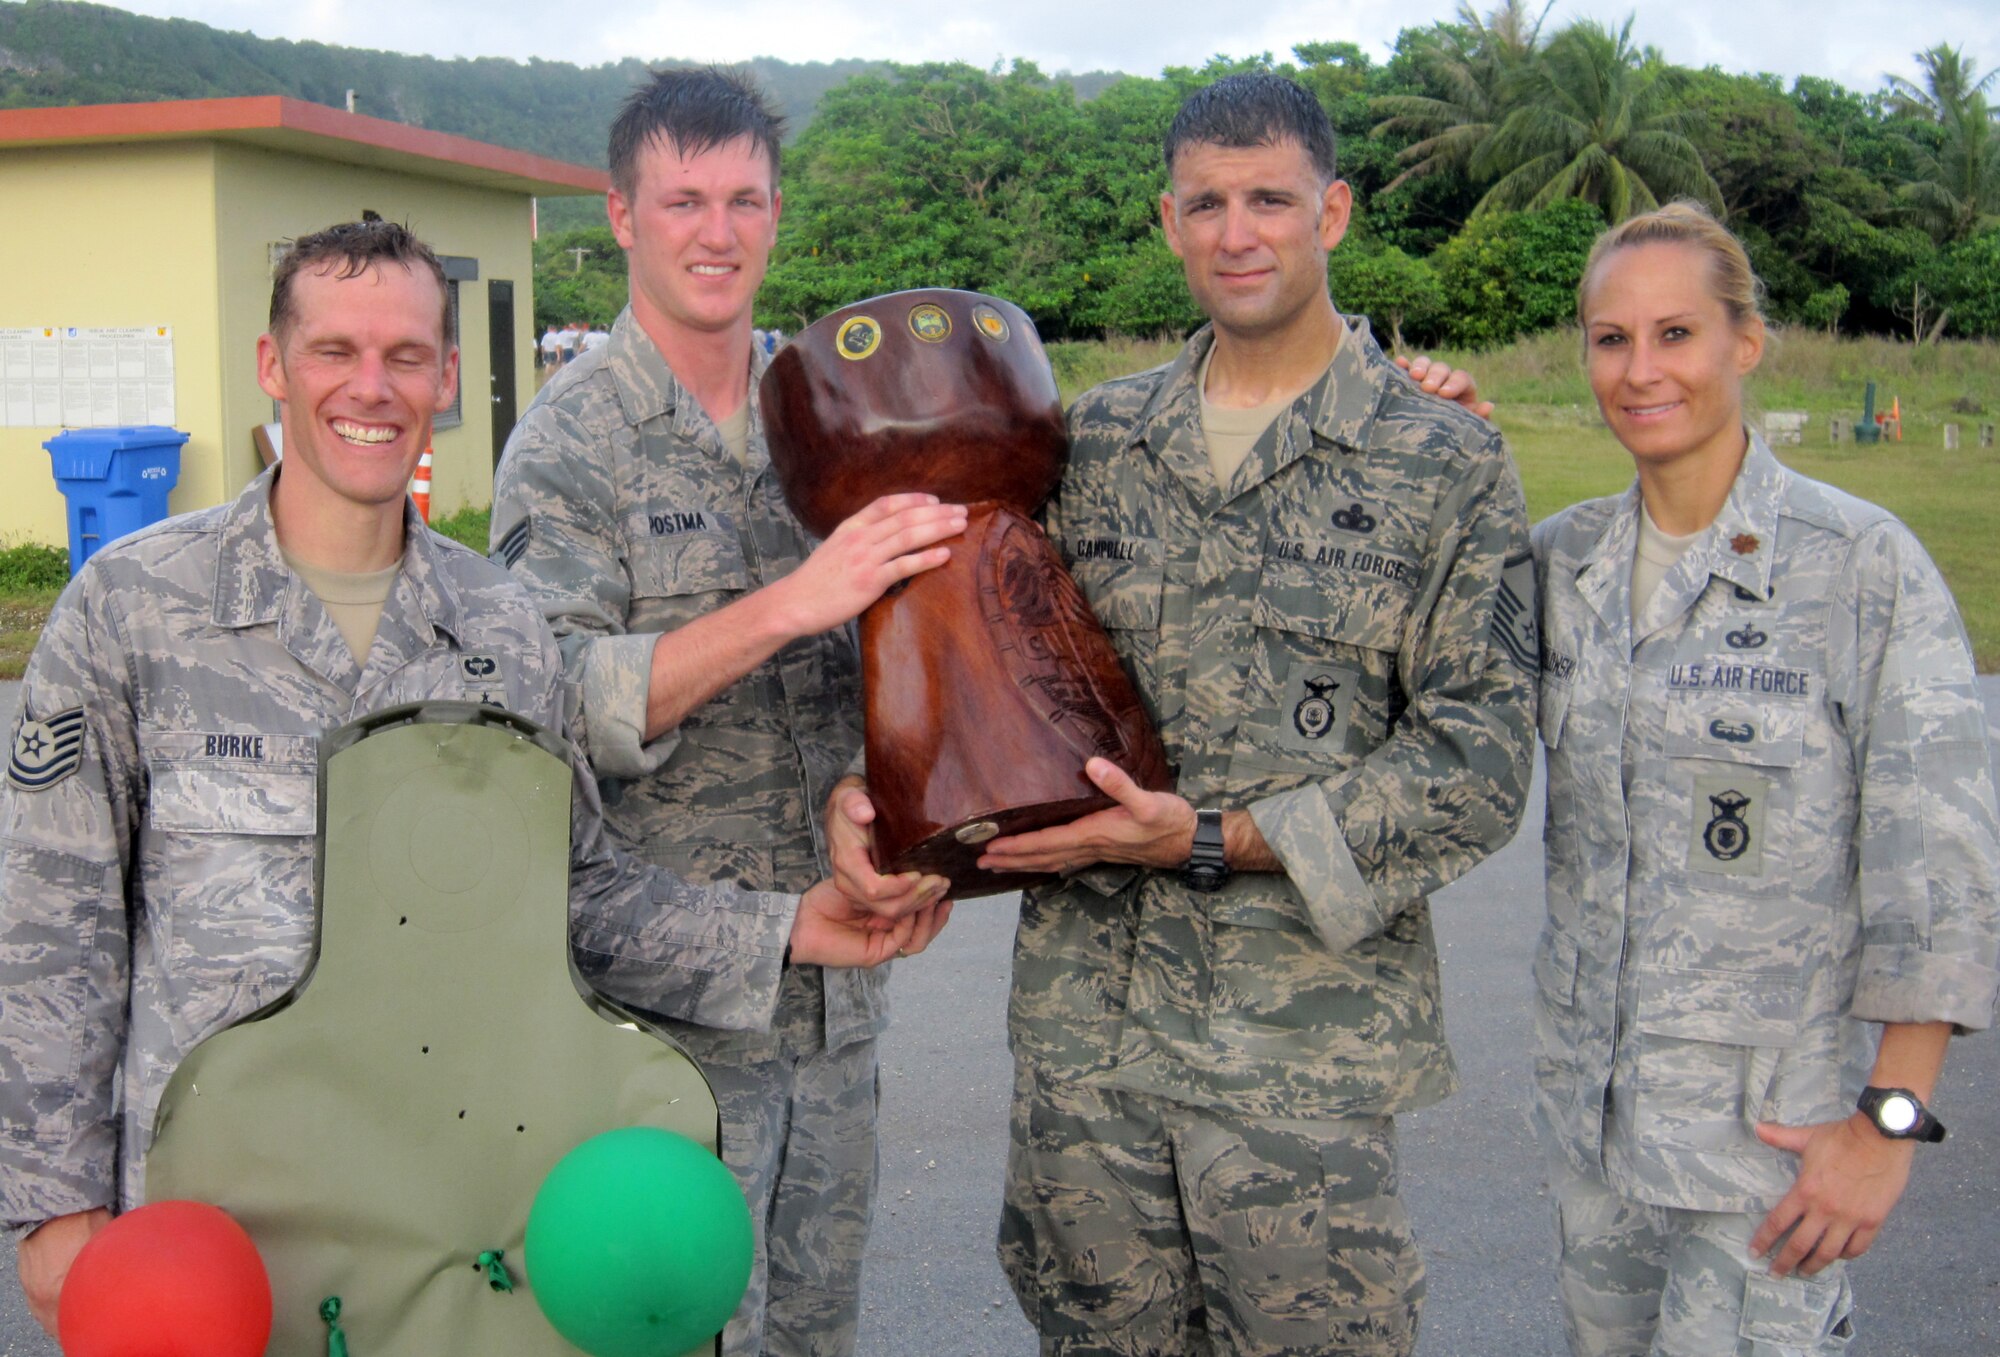 Competitors from the 736th Security Forces Squadron (from left, Tech. Sgt. Vance Burke, Senior Airman Evan Postma, Master Sgt. Seth Campbell and Maj. Tara Opielowski) pose with the coveted latte stone trophy at the combat arms training and maintenance range after claiming victory during the 36th Contingency Response Group's quarterly warrior day competition here Feb. 6. (U.S. Air Force courtesy photo)
